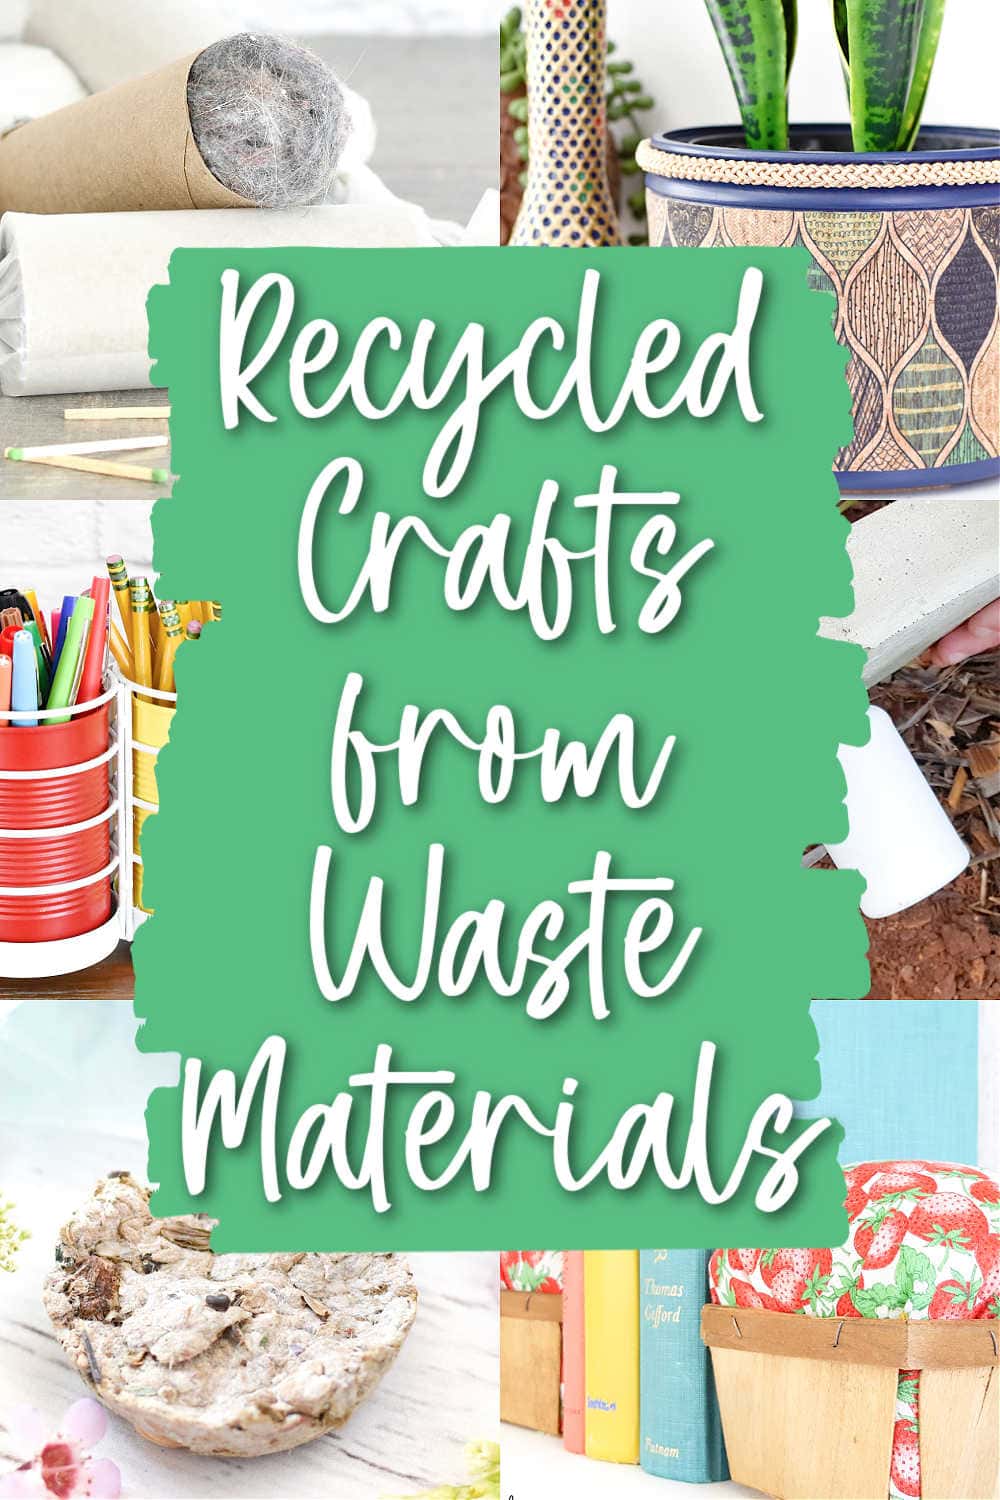 craft projects that use waste materials from the trash and recycling bin